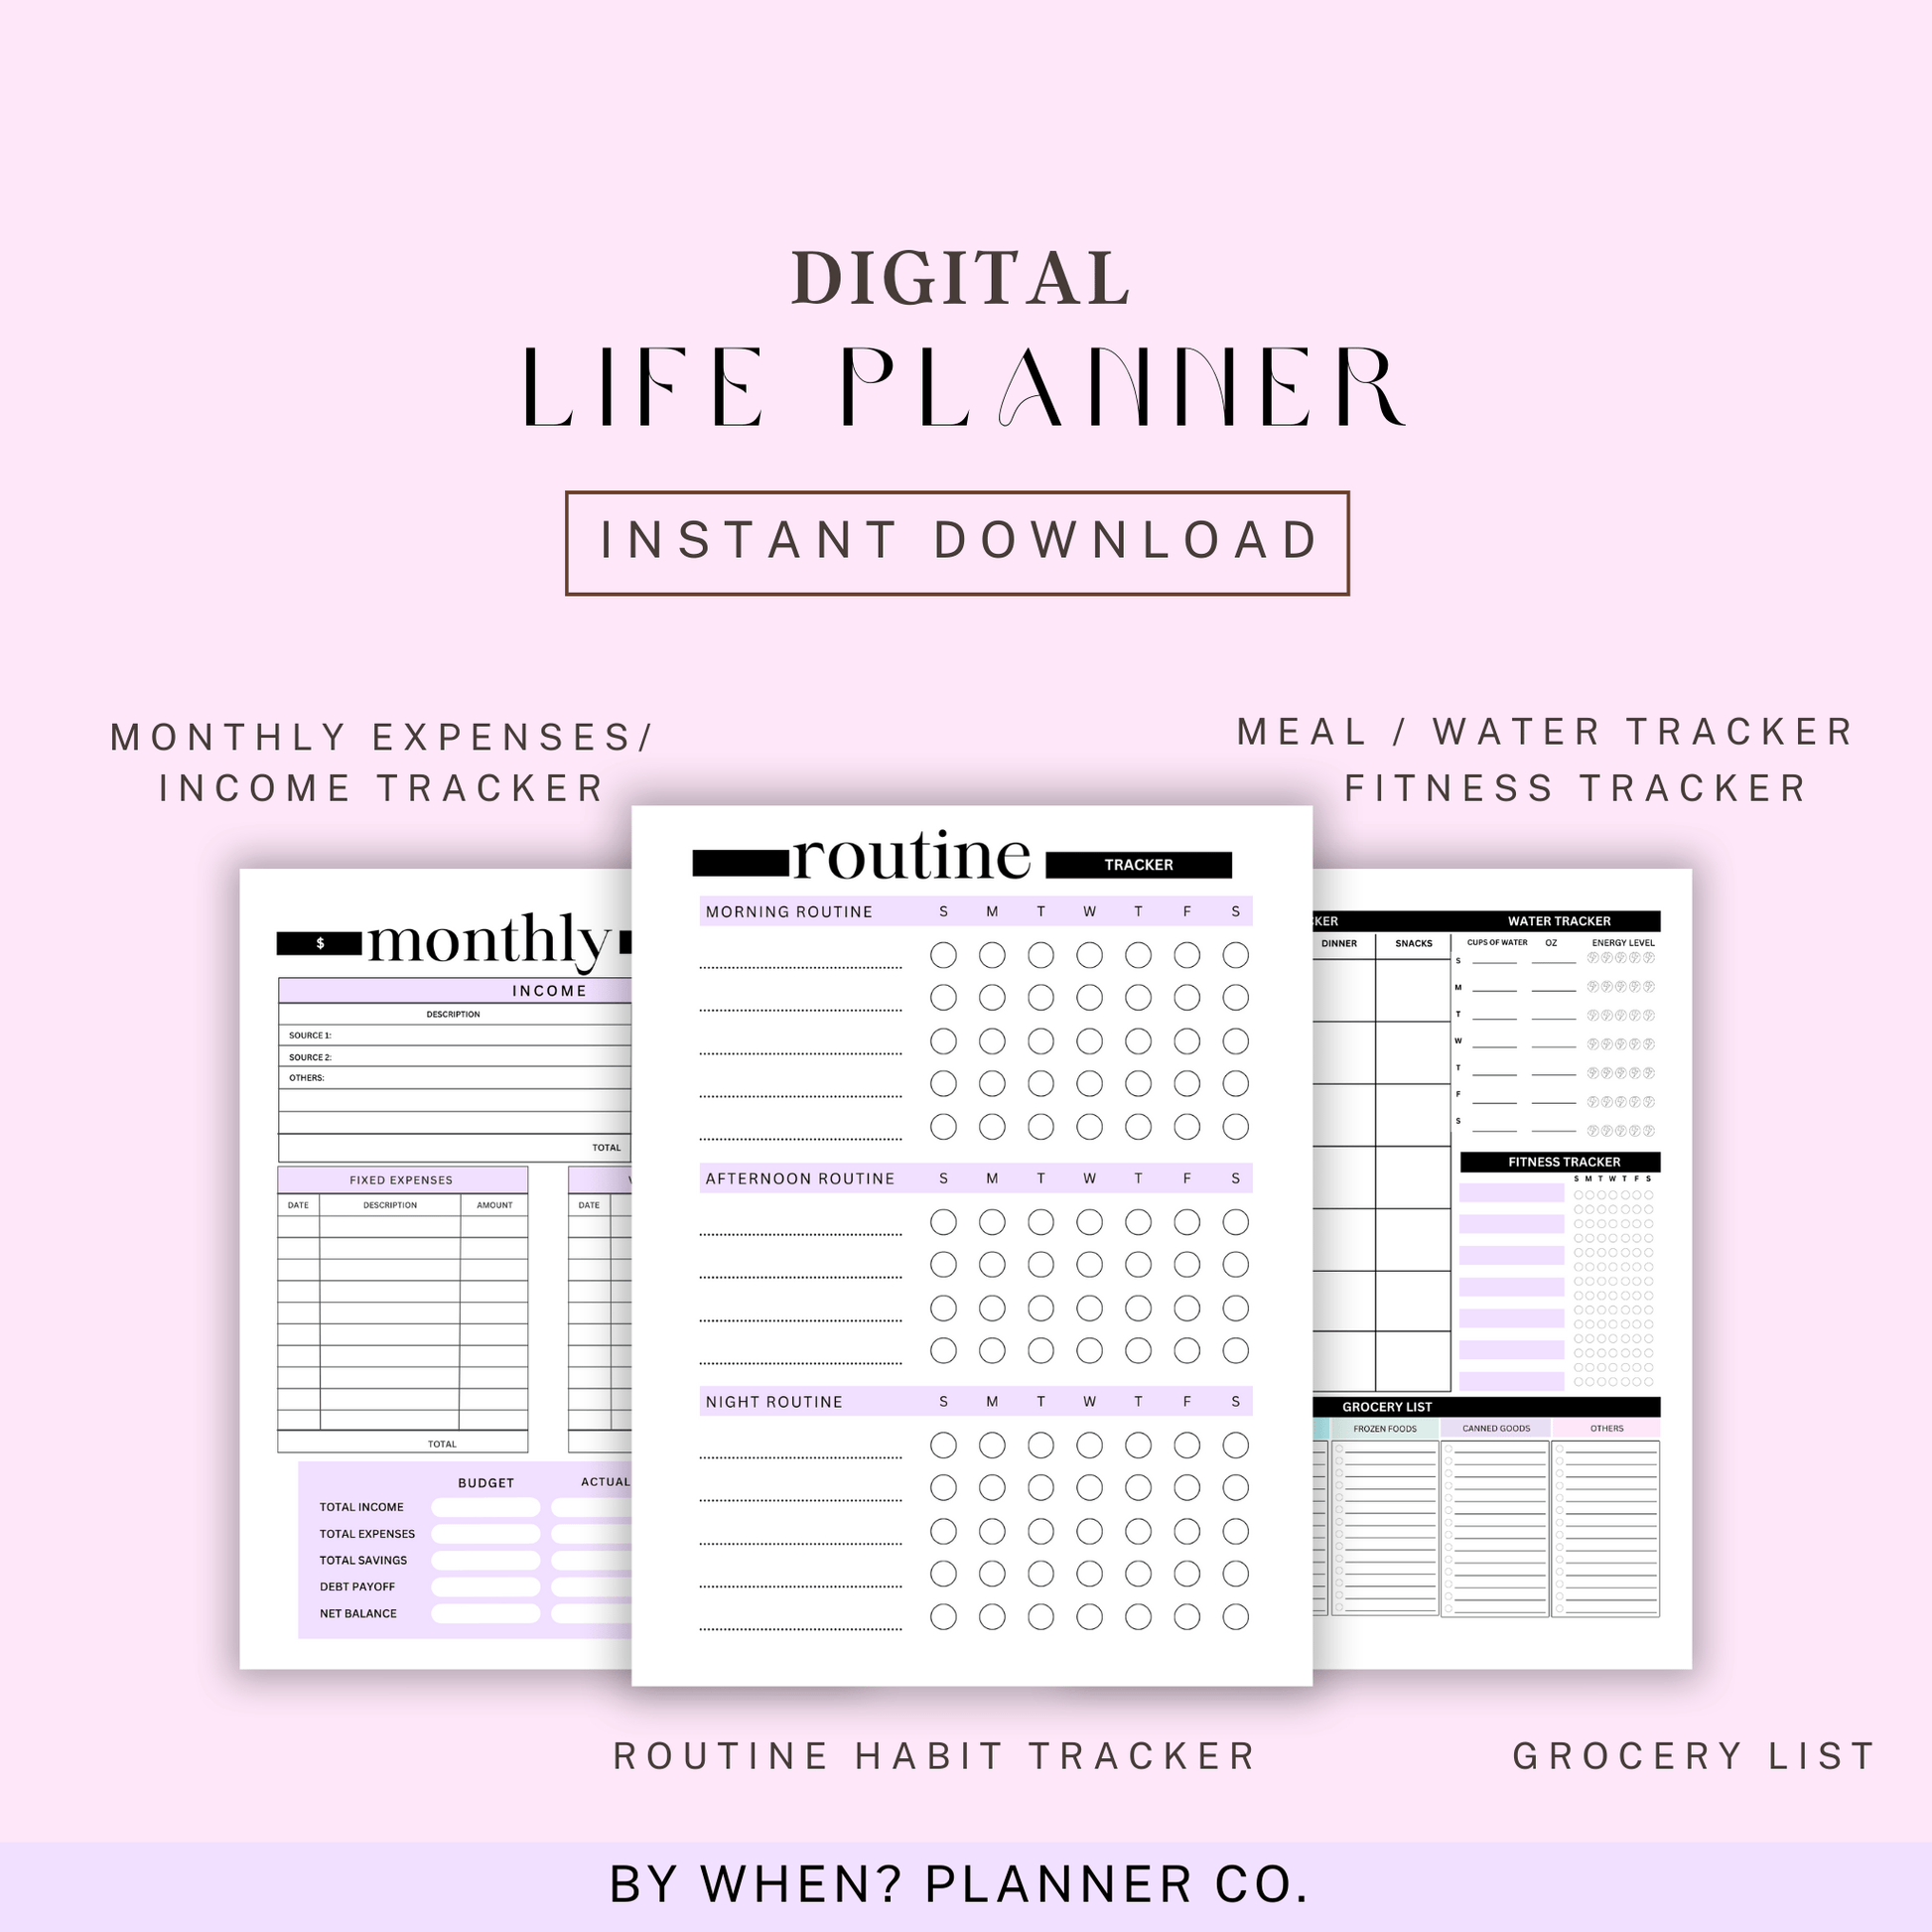 Digital Life Planner - By When? Planner Co.